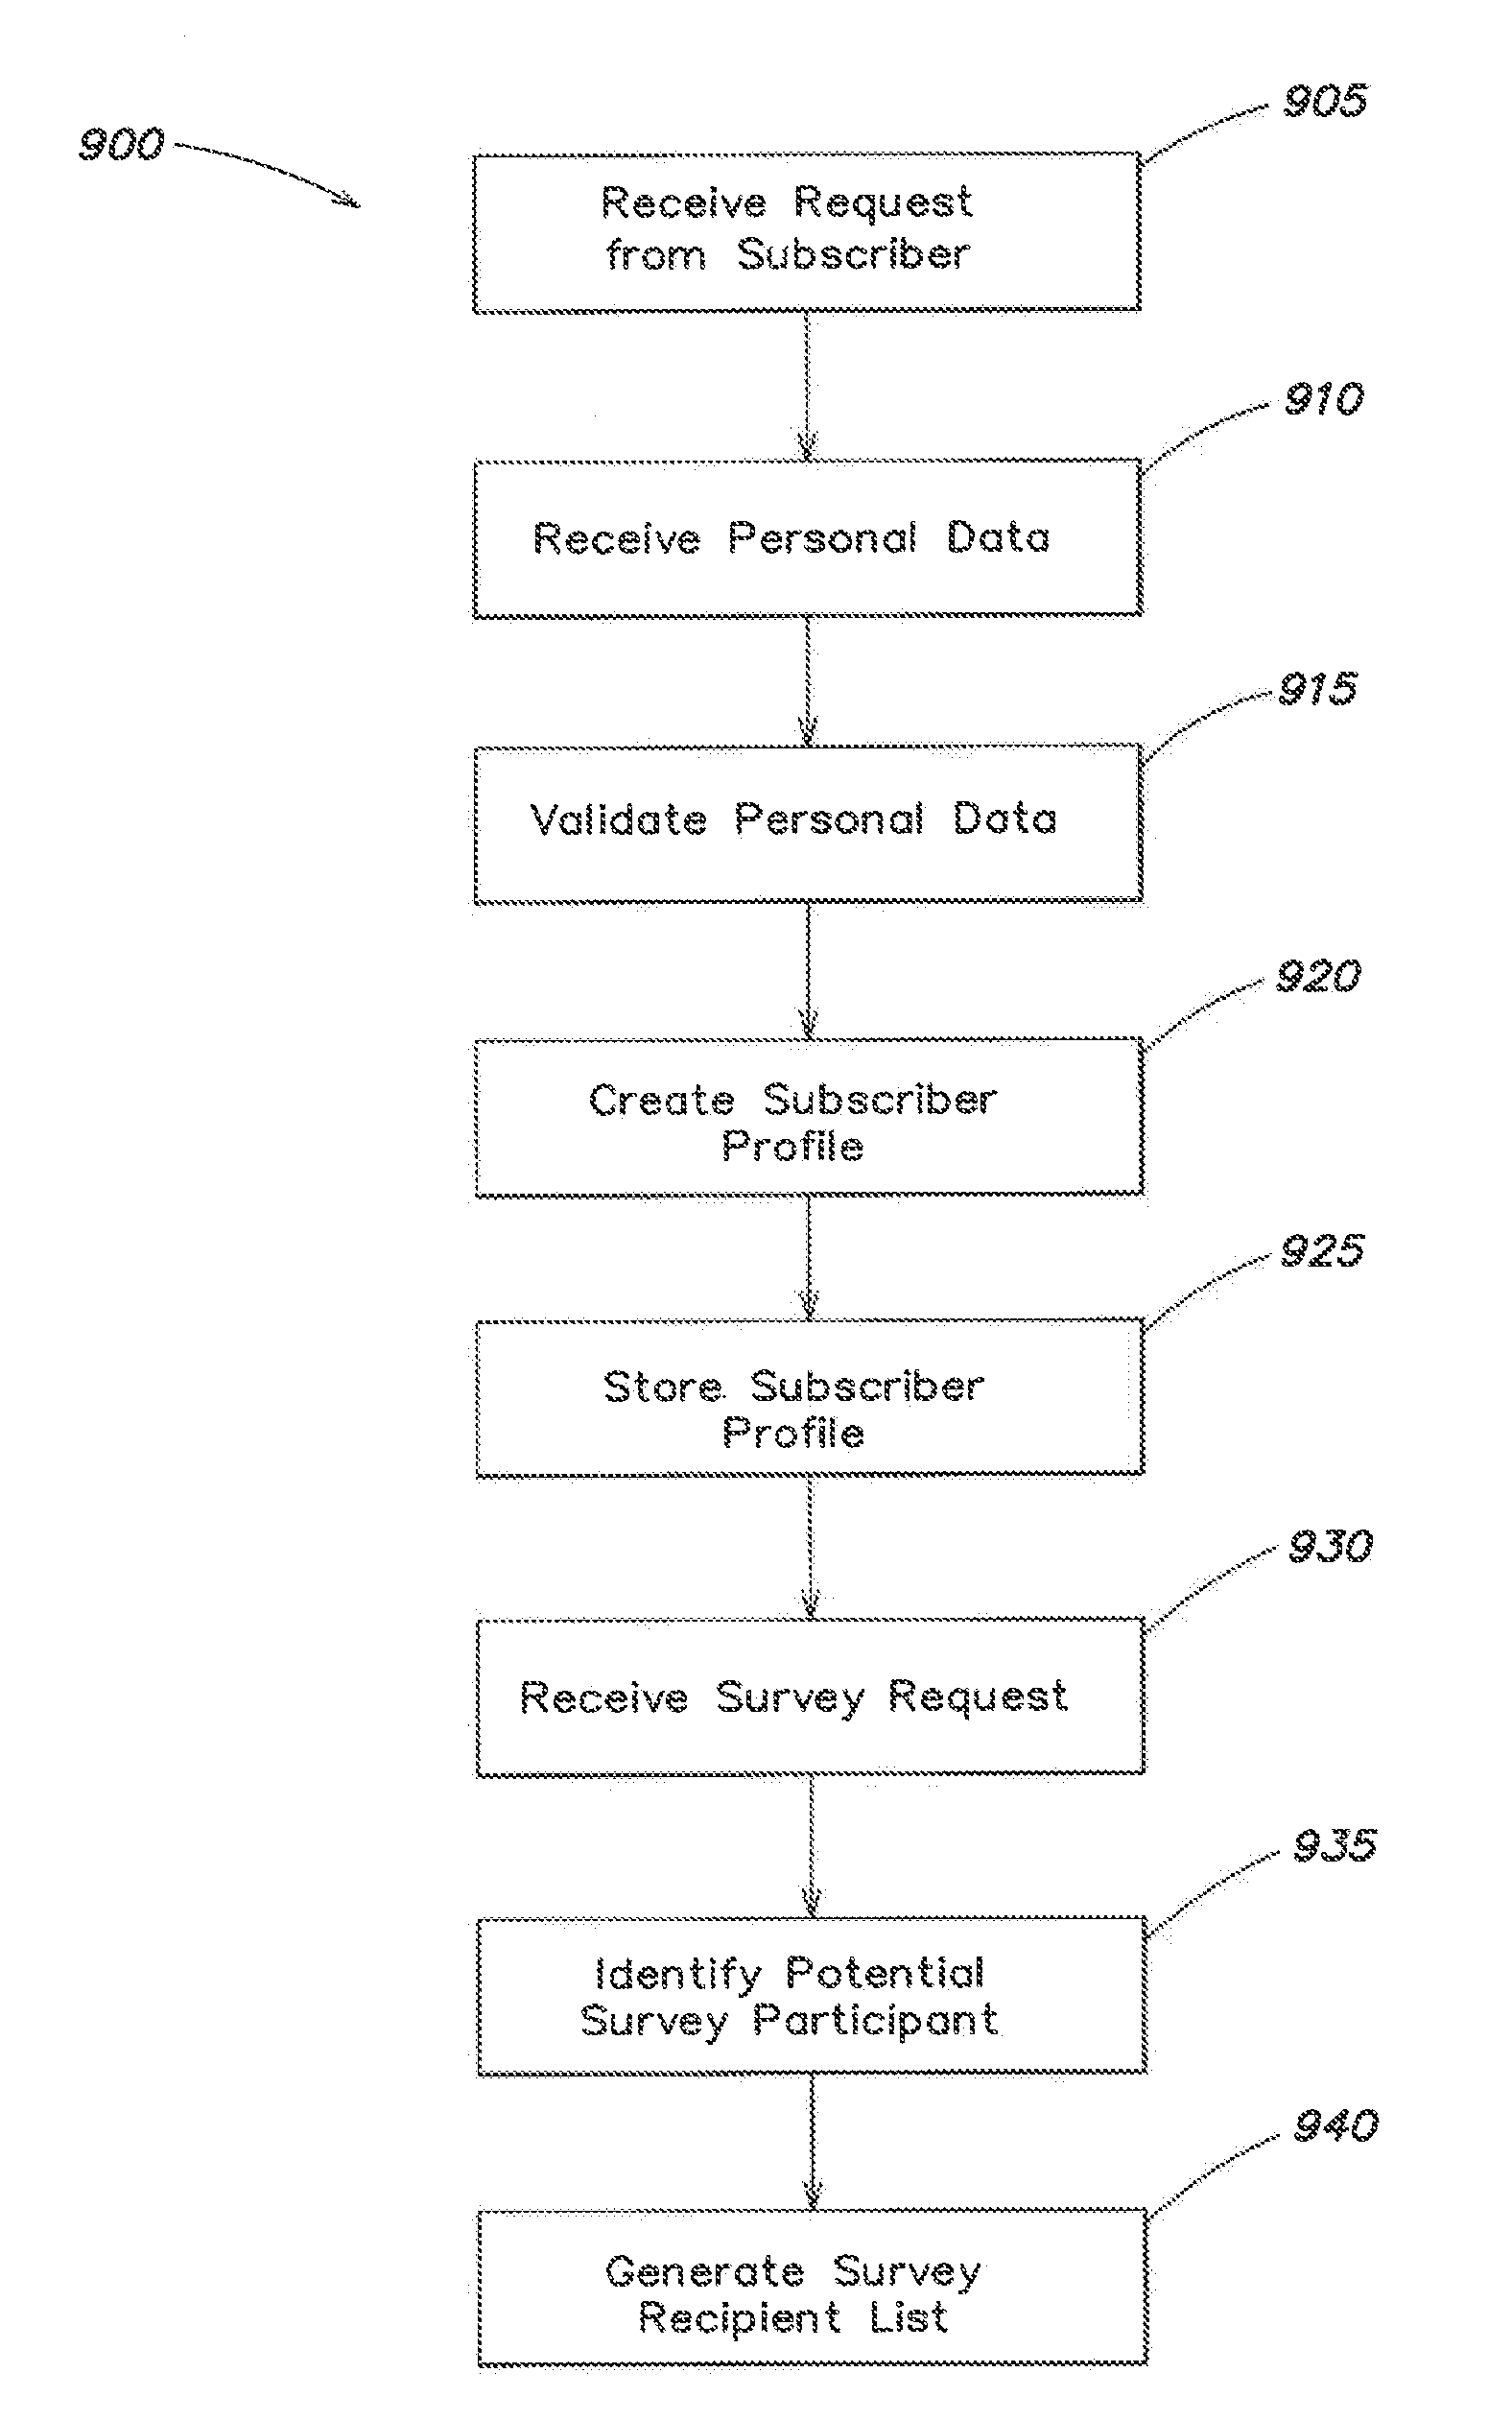 Systems and methods for universal enhanced log-in, identity document verification, and dedicated survey participation